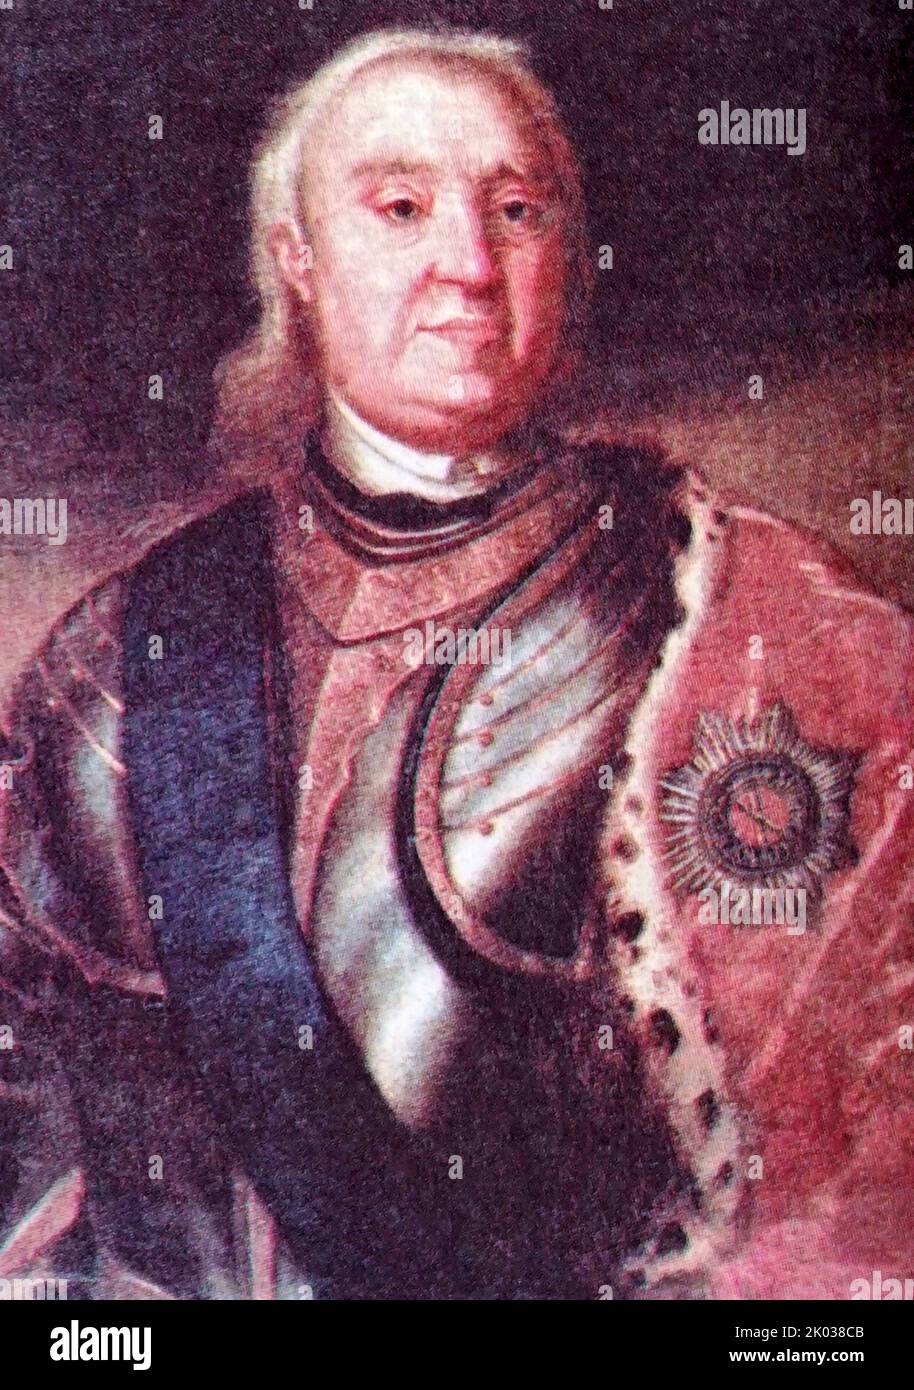 Field Marshal Boris Sheremetev was a Russian diplomat and general field marshal during the Great Northern War. He became the first Russian count in 1706. Stock Photo